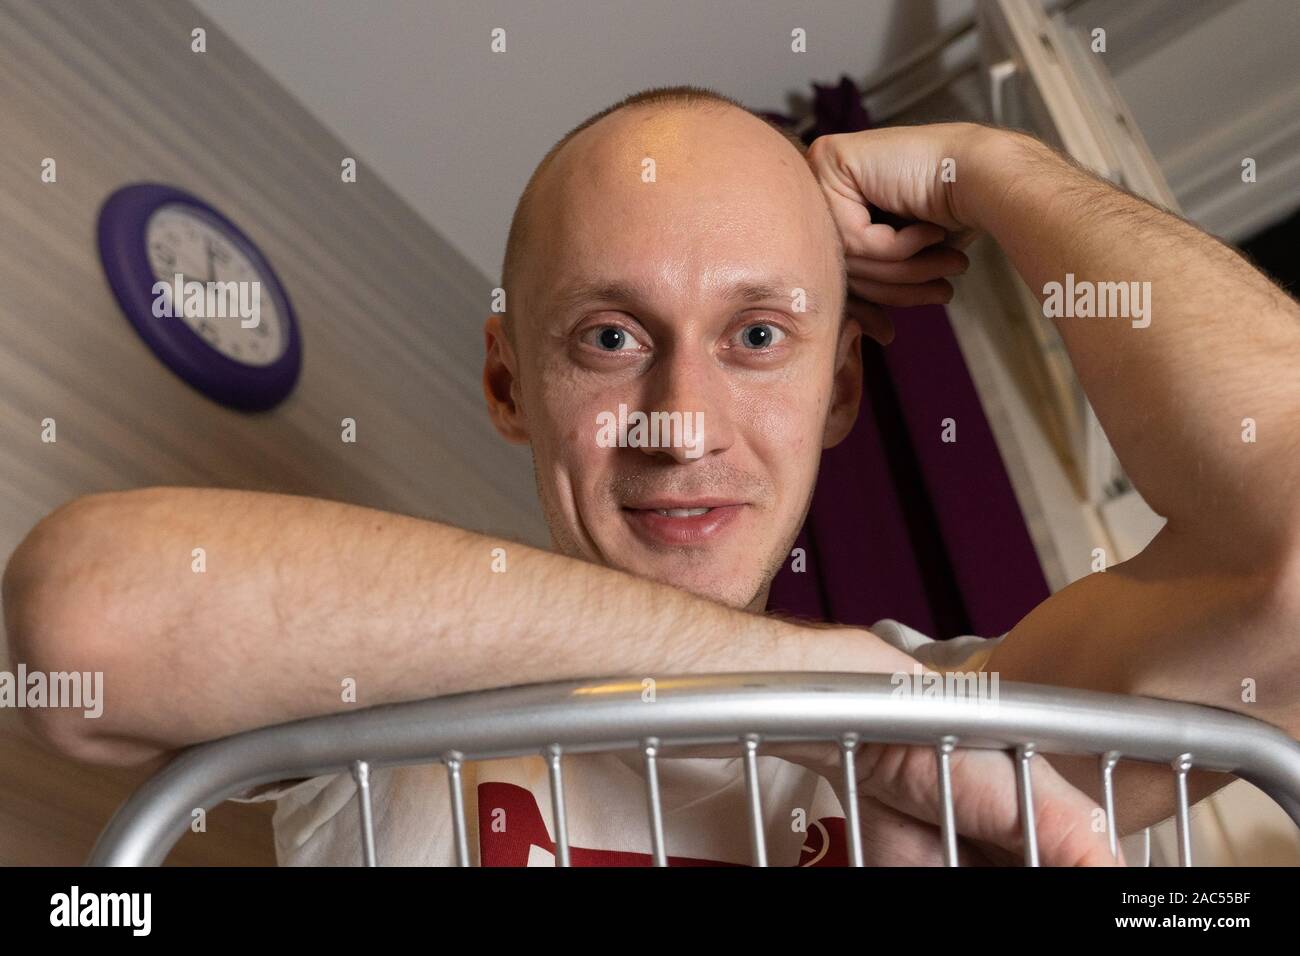 Portrait of a smiling good-natured young man at home. Humpty Dumpty. Stock Photo